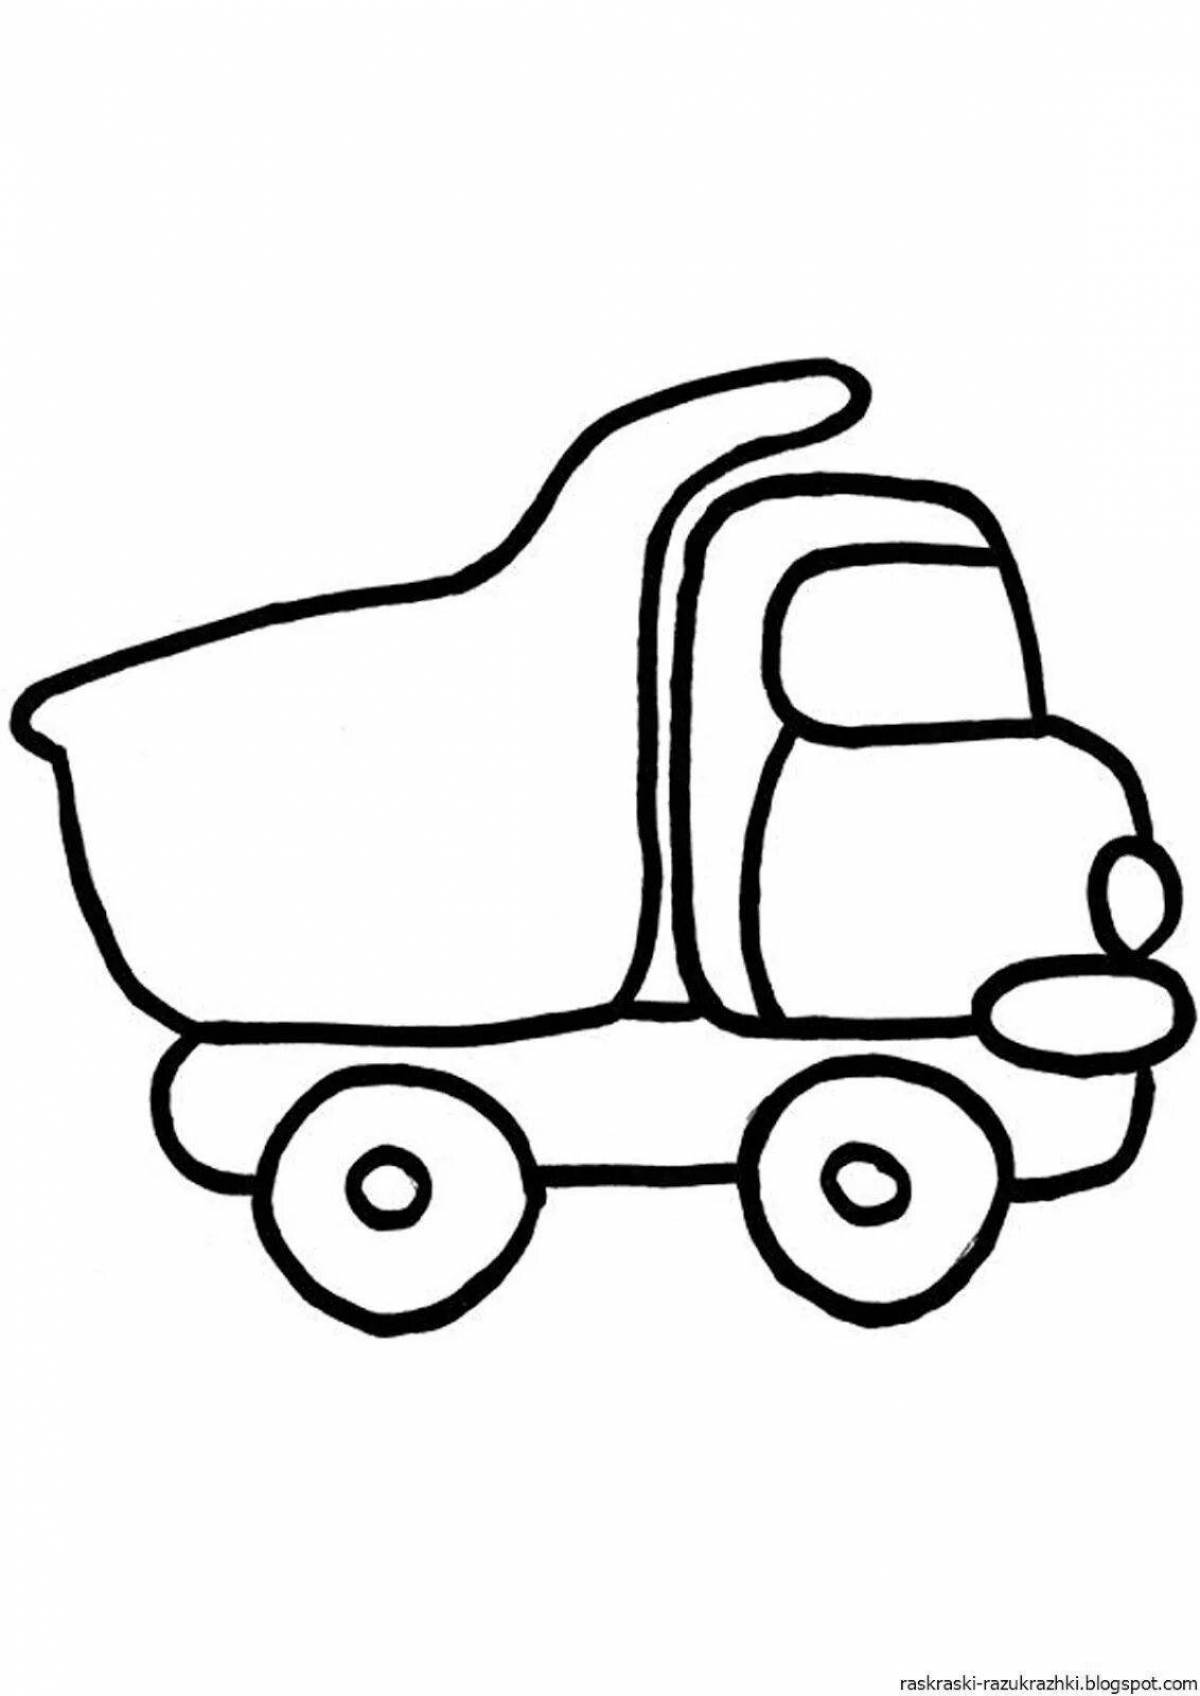 Fun car coloring for 2-3 year olds